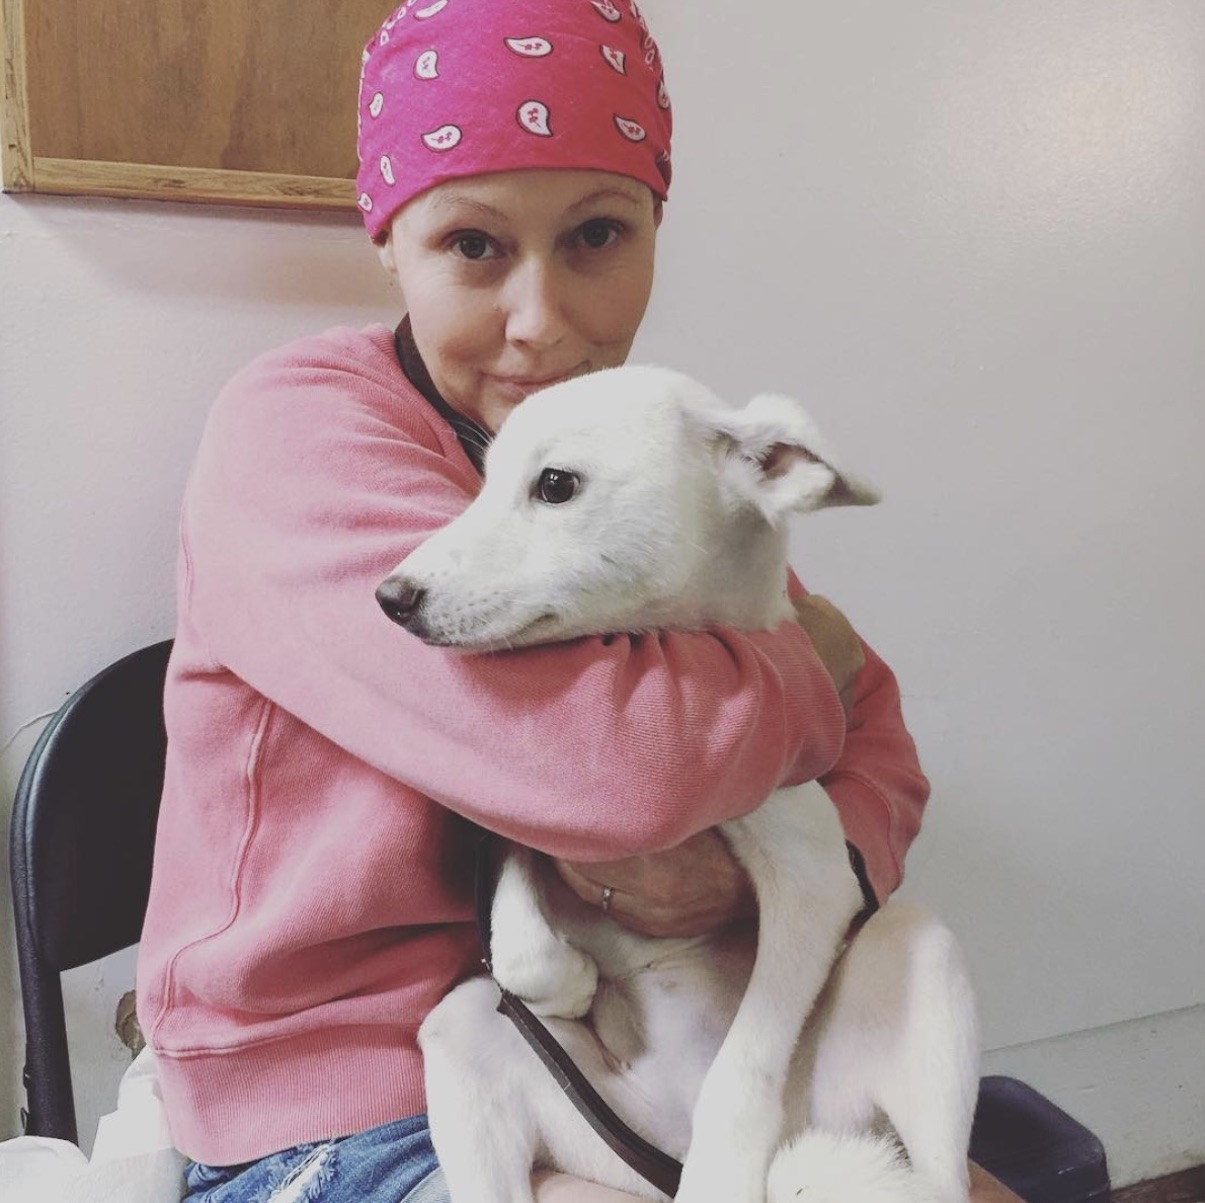 Shannen Doherty with a pink bandana covering her head hugging a dog